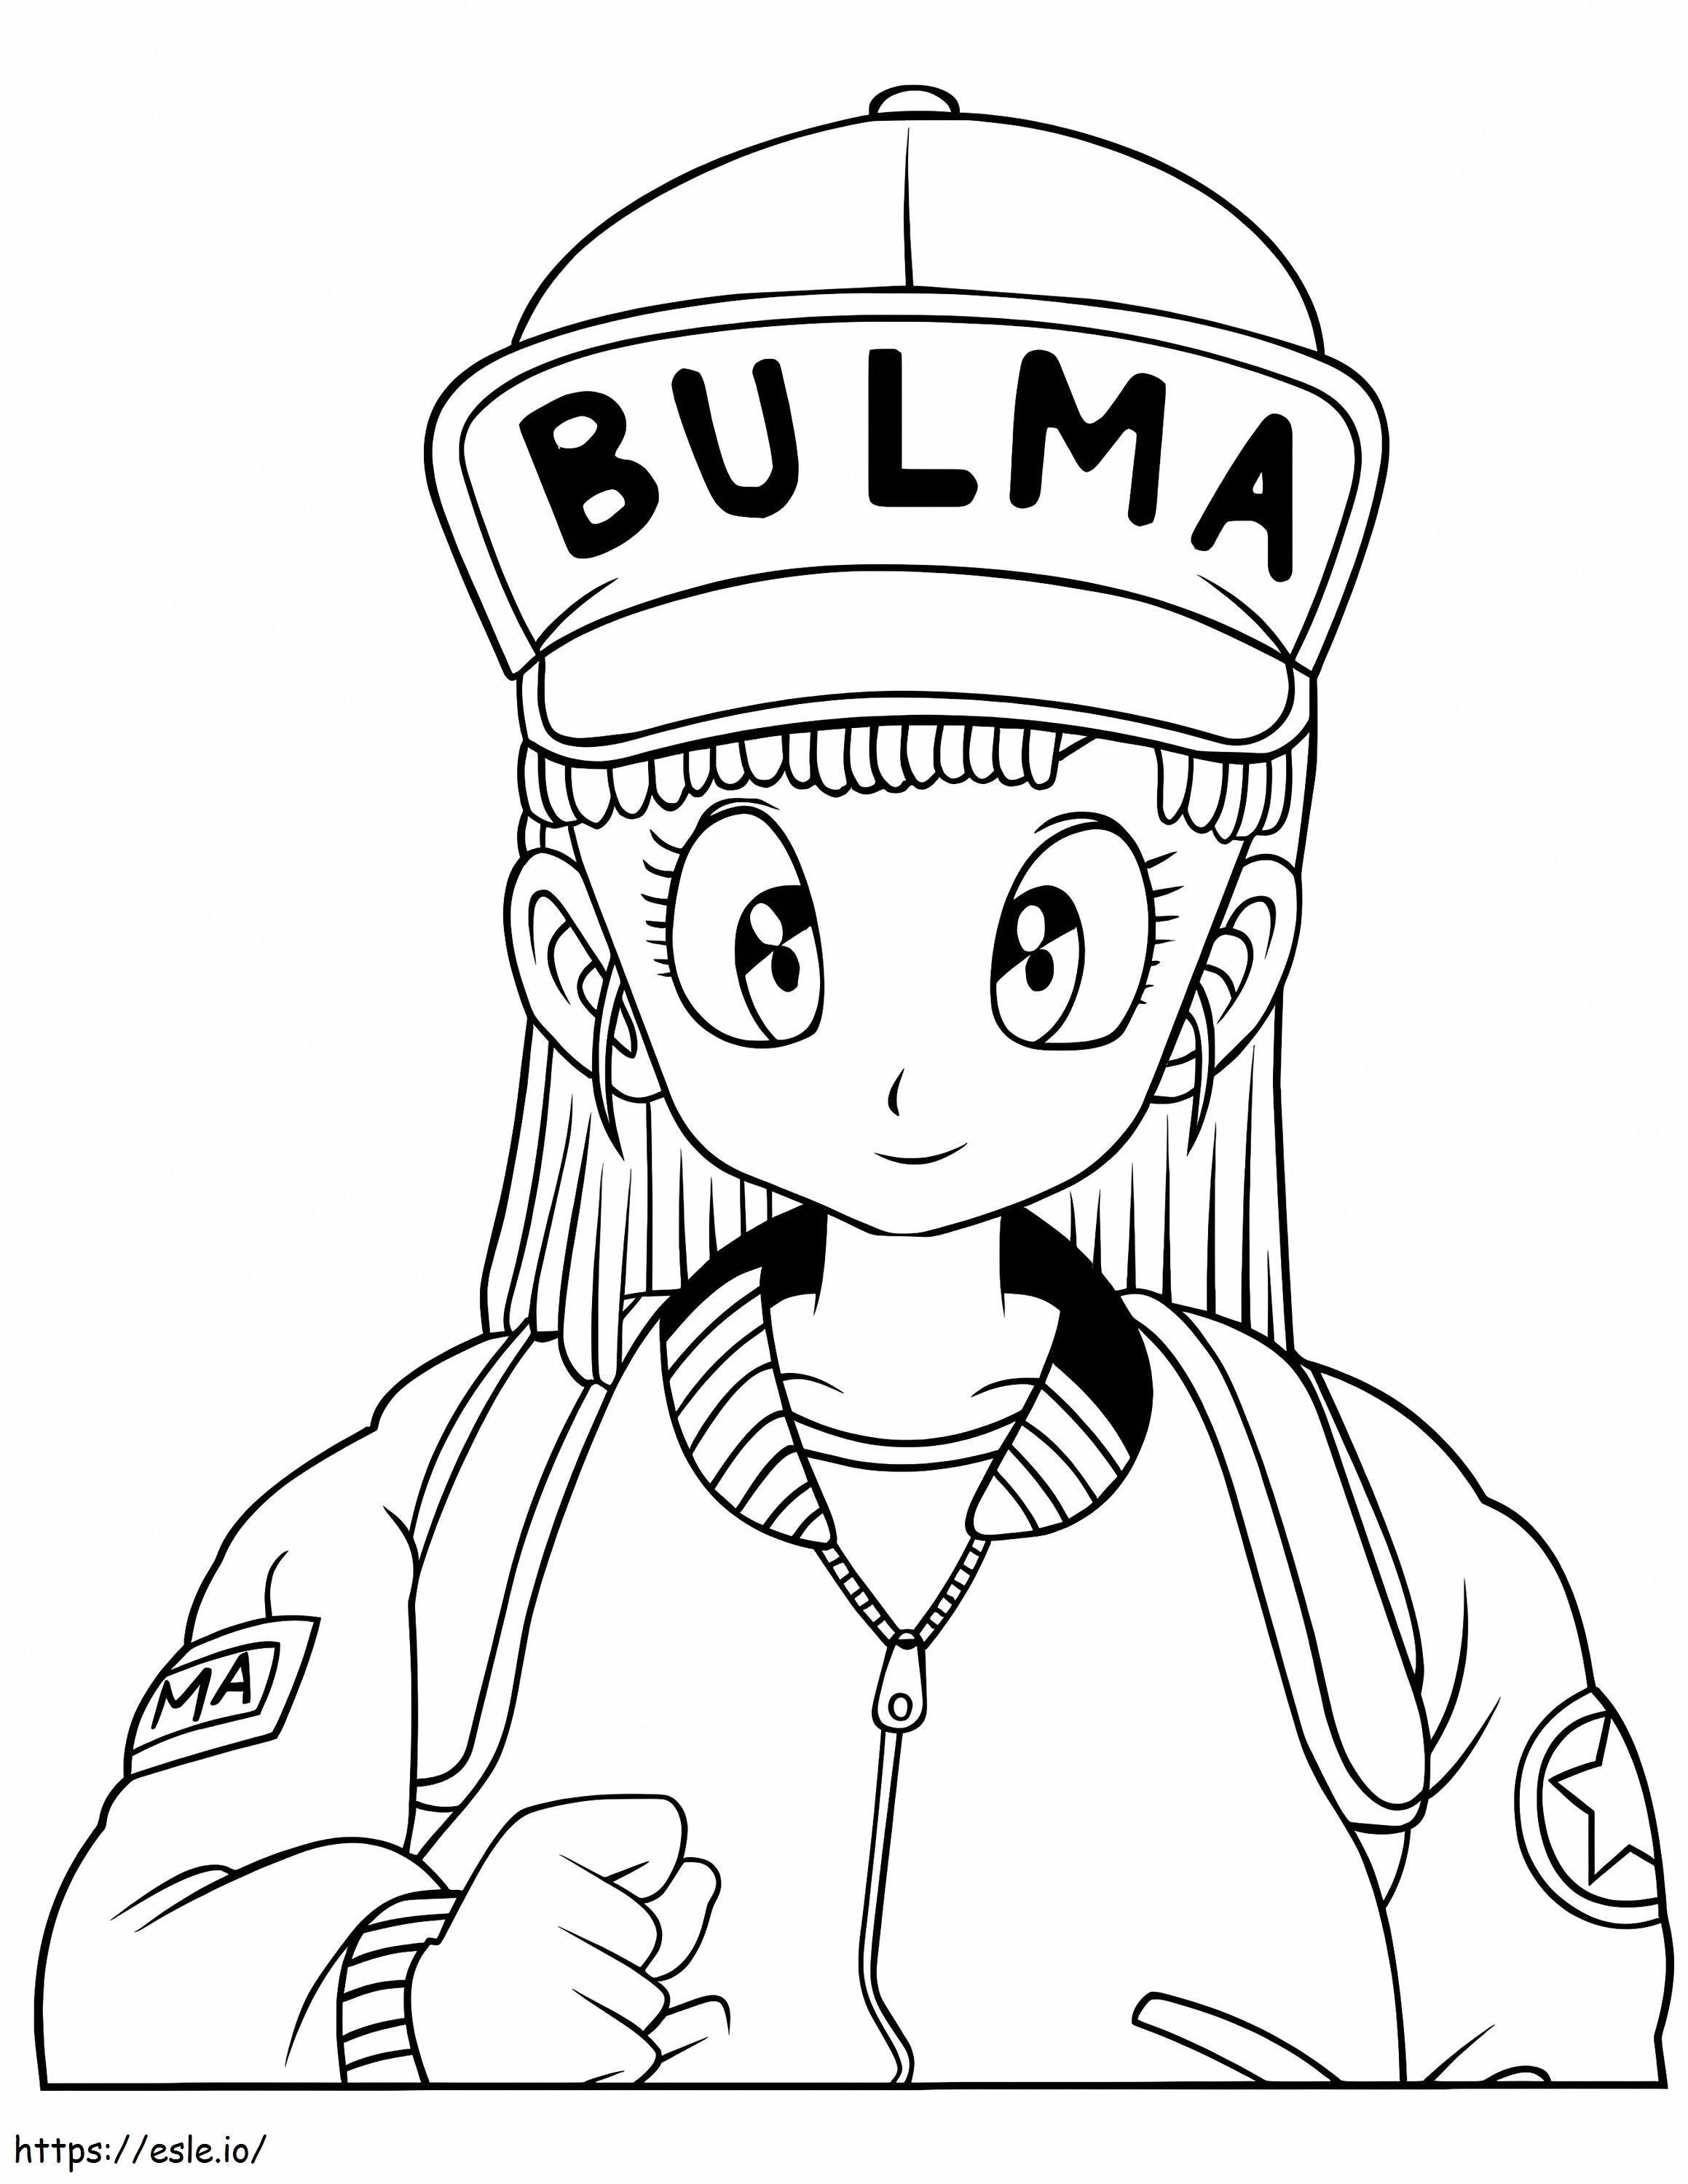 Bulma Face Smiling coloring page